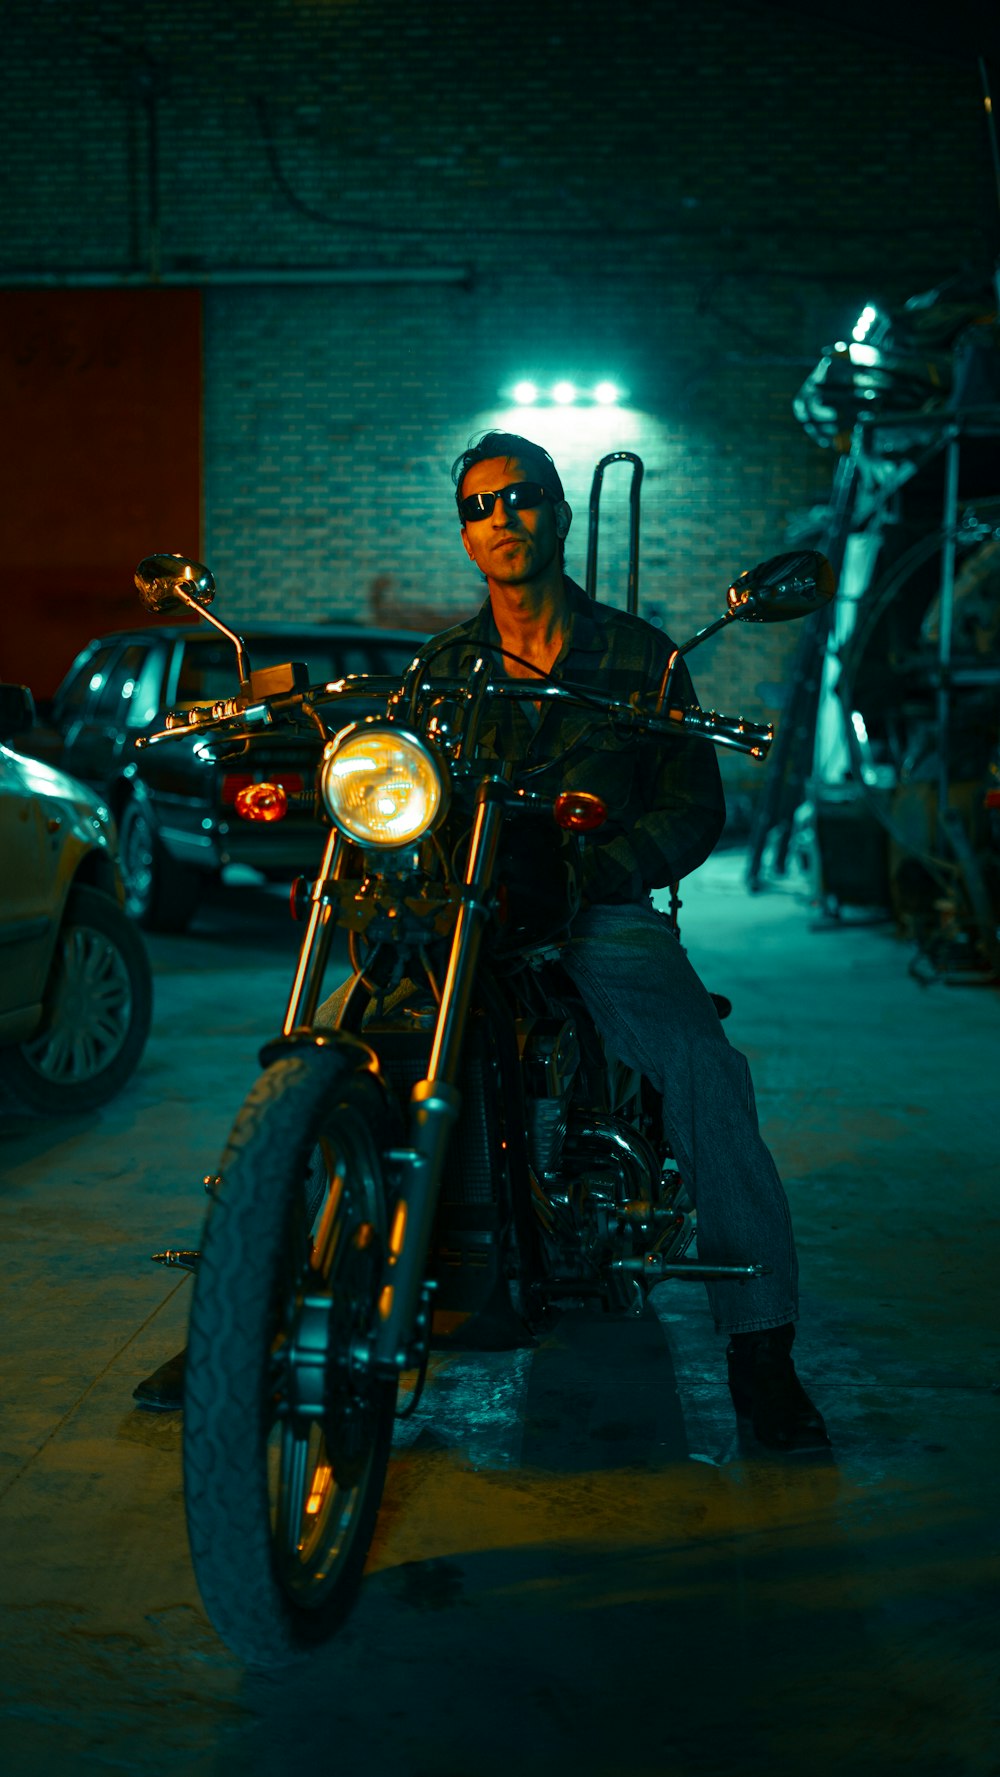 a man sitting on a motorcycle in a garage